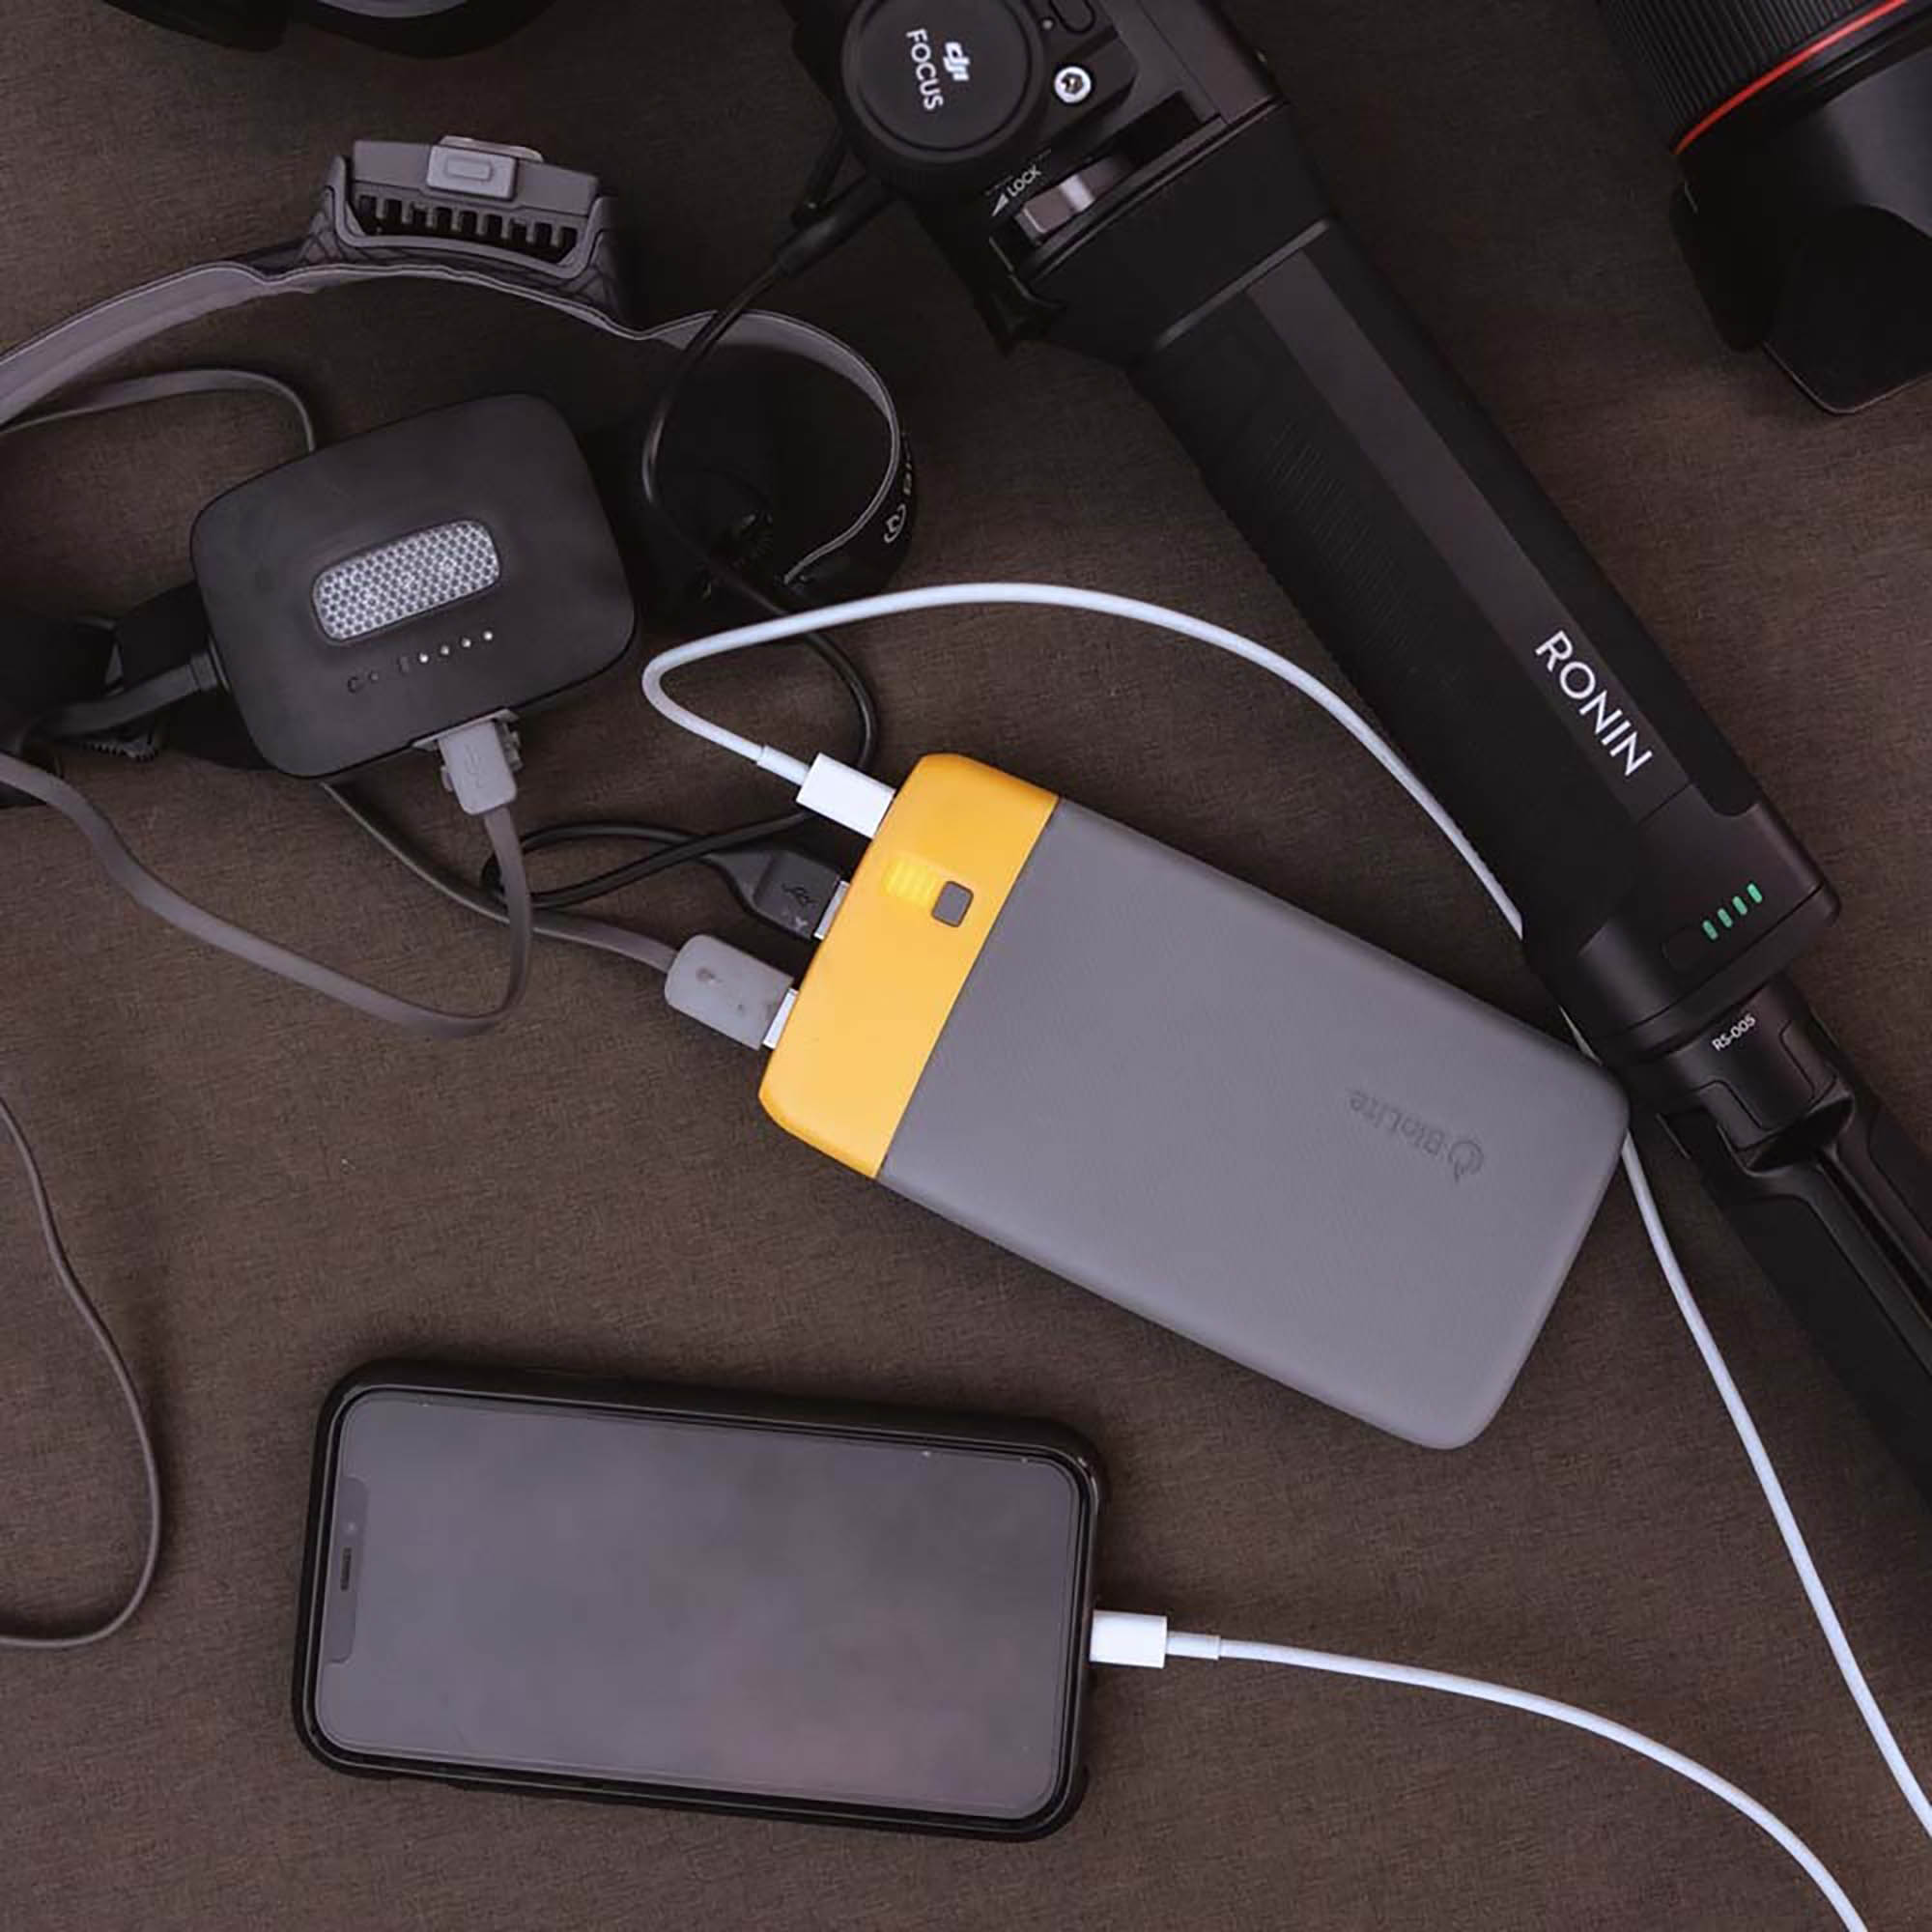 BioLite Charge 80 PD USB Device Charger & Power Pack 